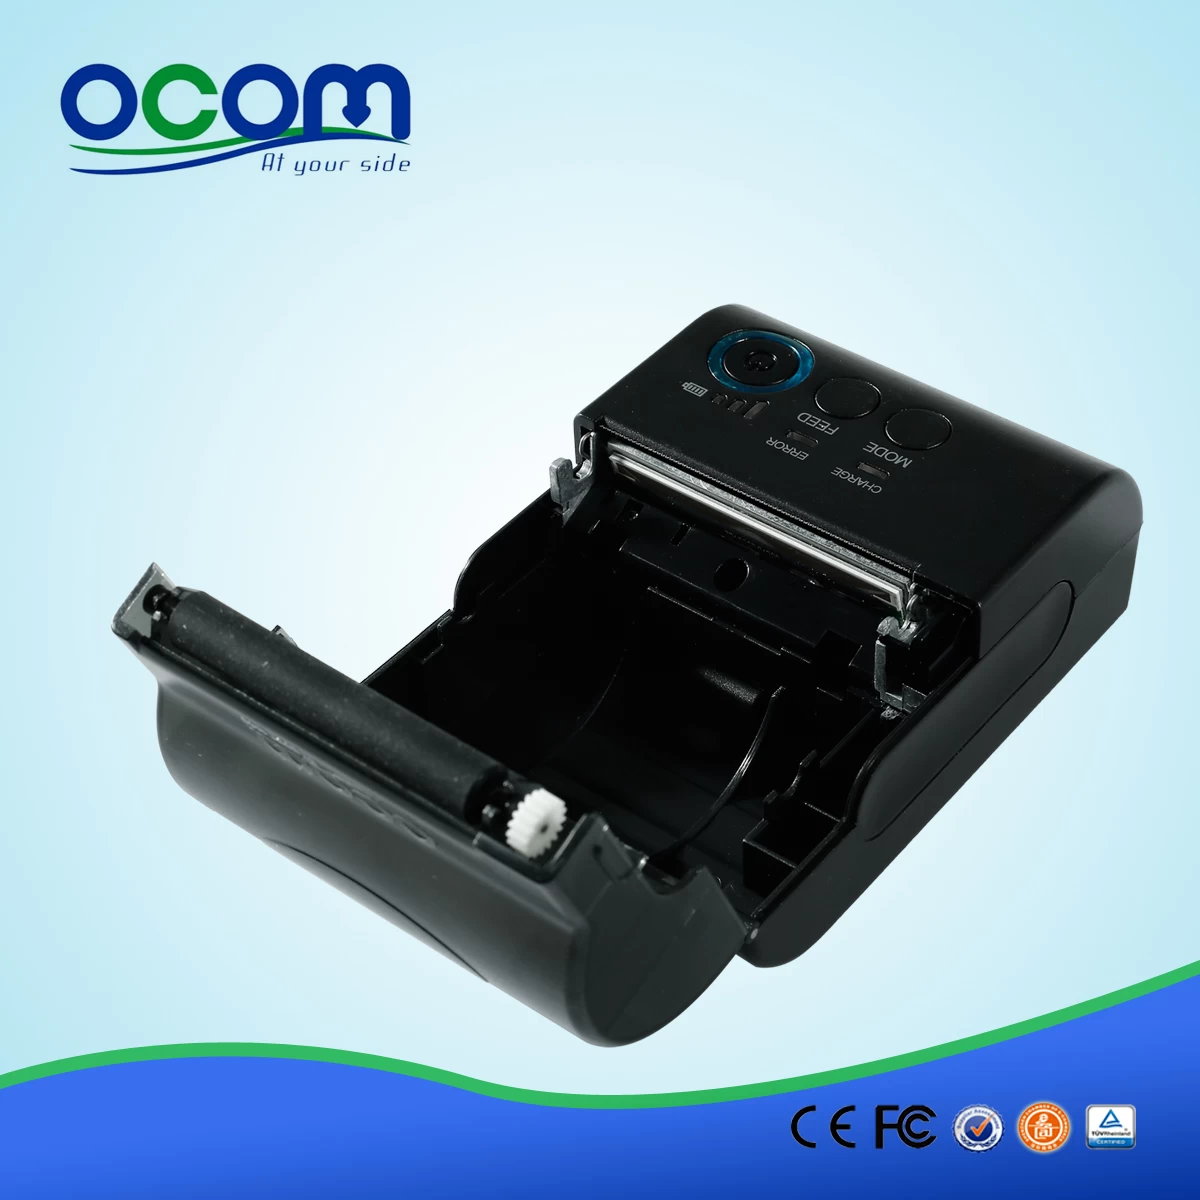 58mm Bluetooth Mobile Pos Thermal Printer for Android or iOS